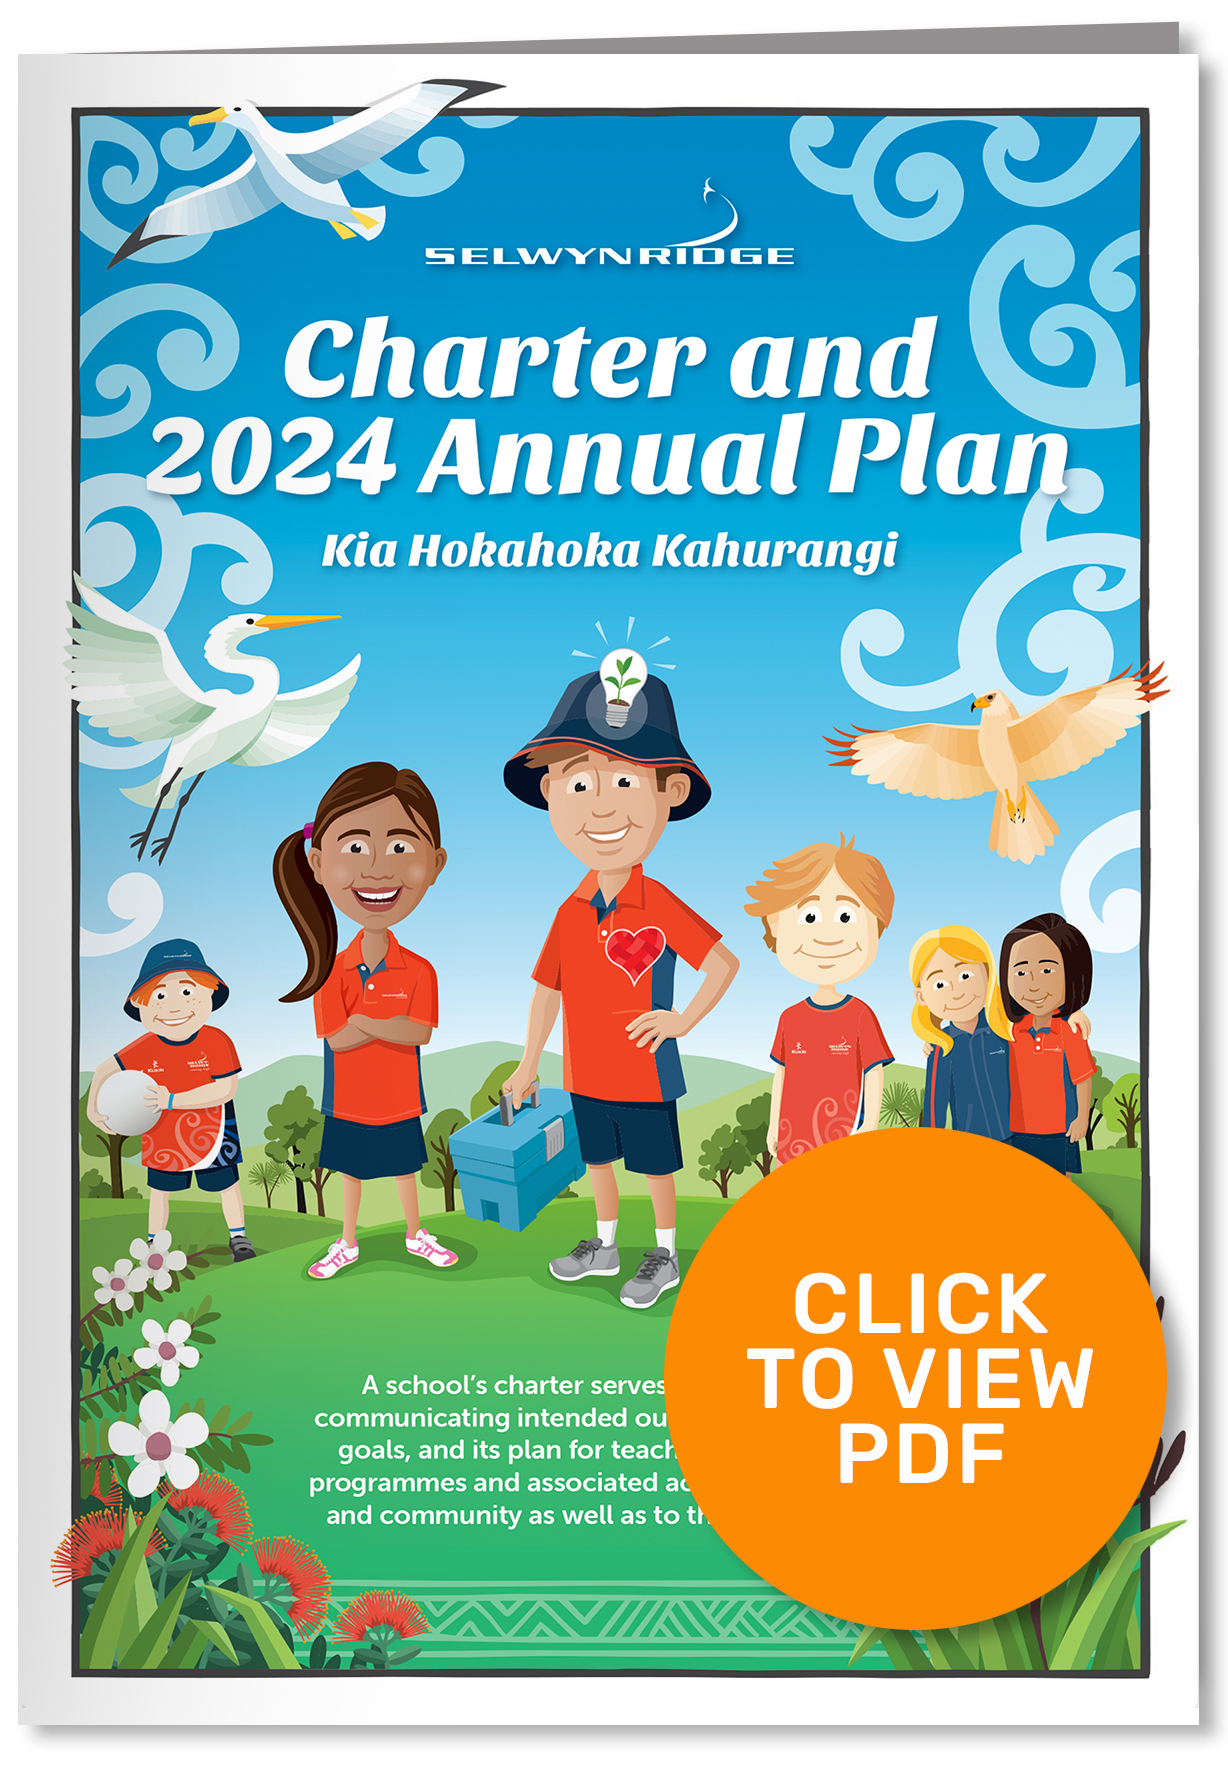 Charter and 2024 Annual Plan cover.jpg